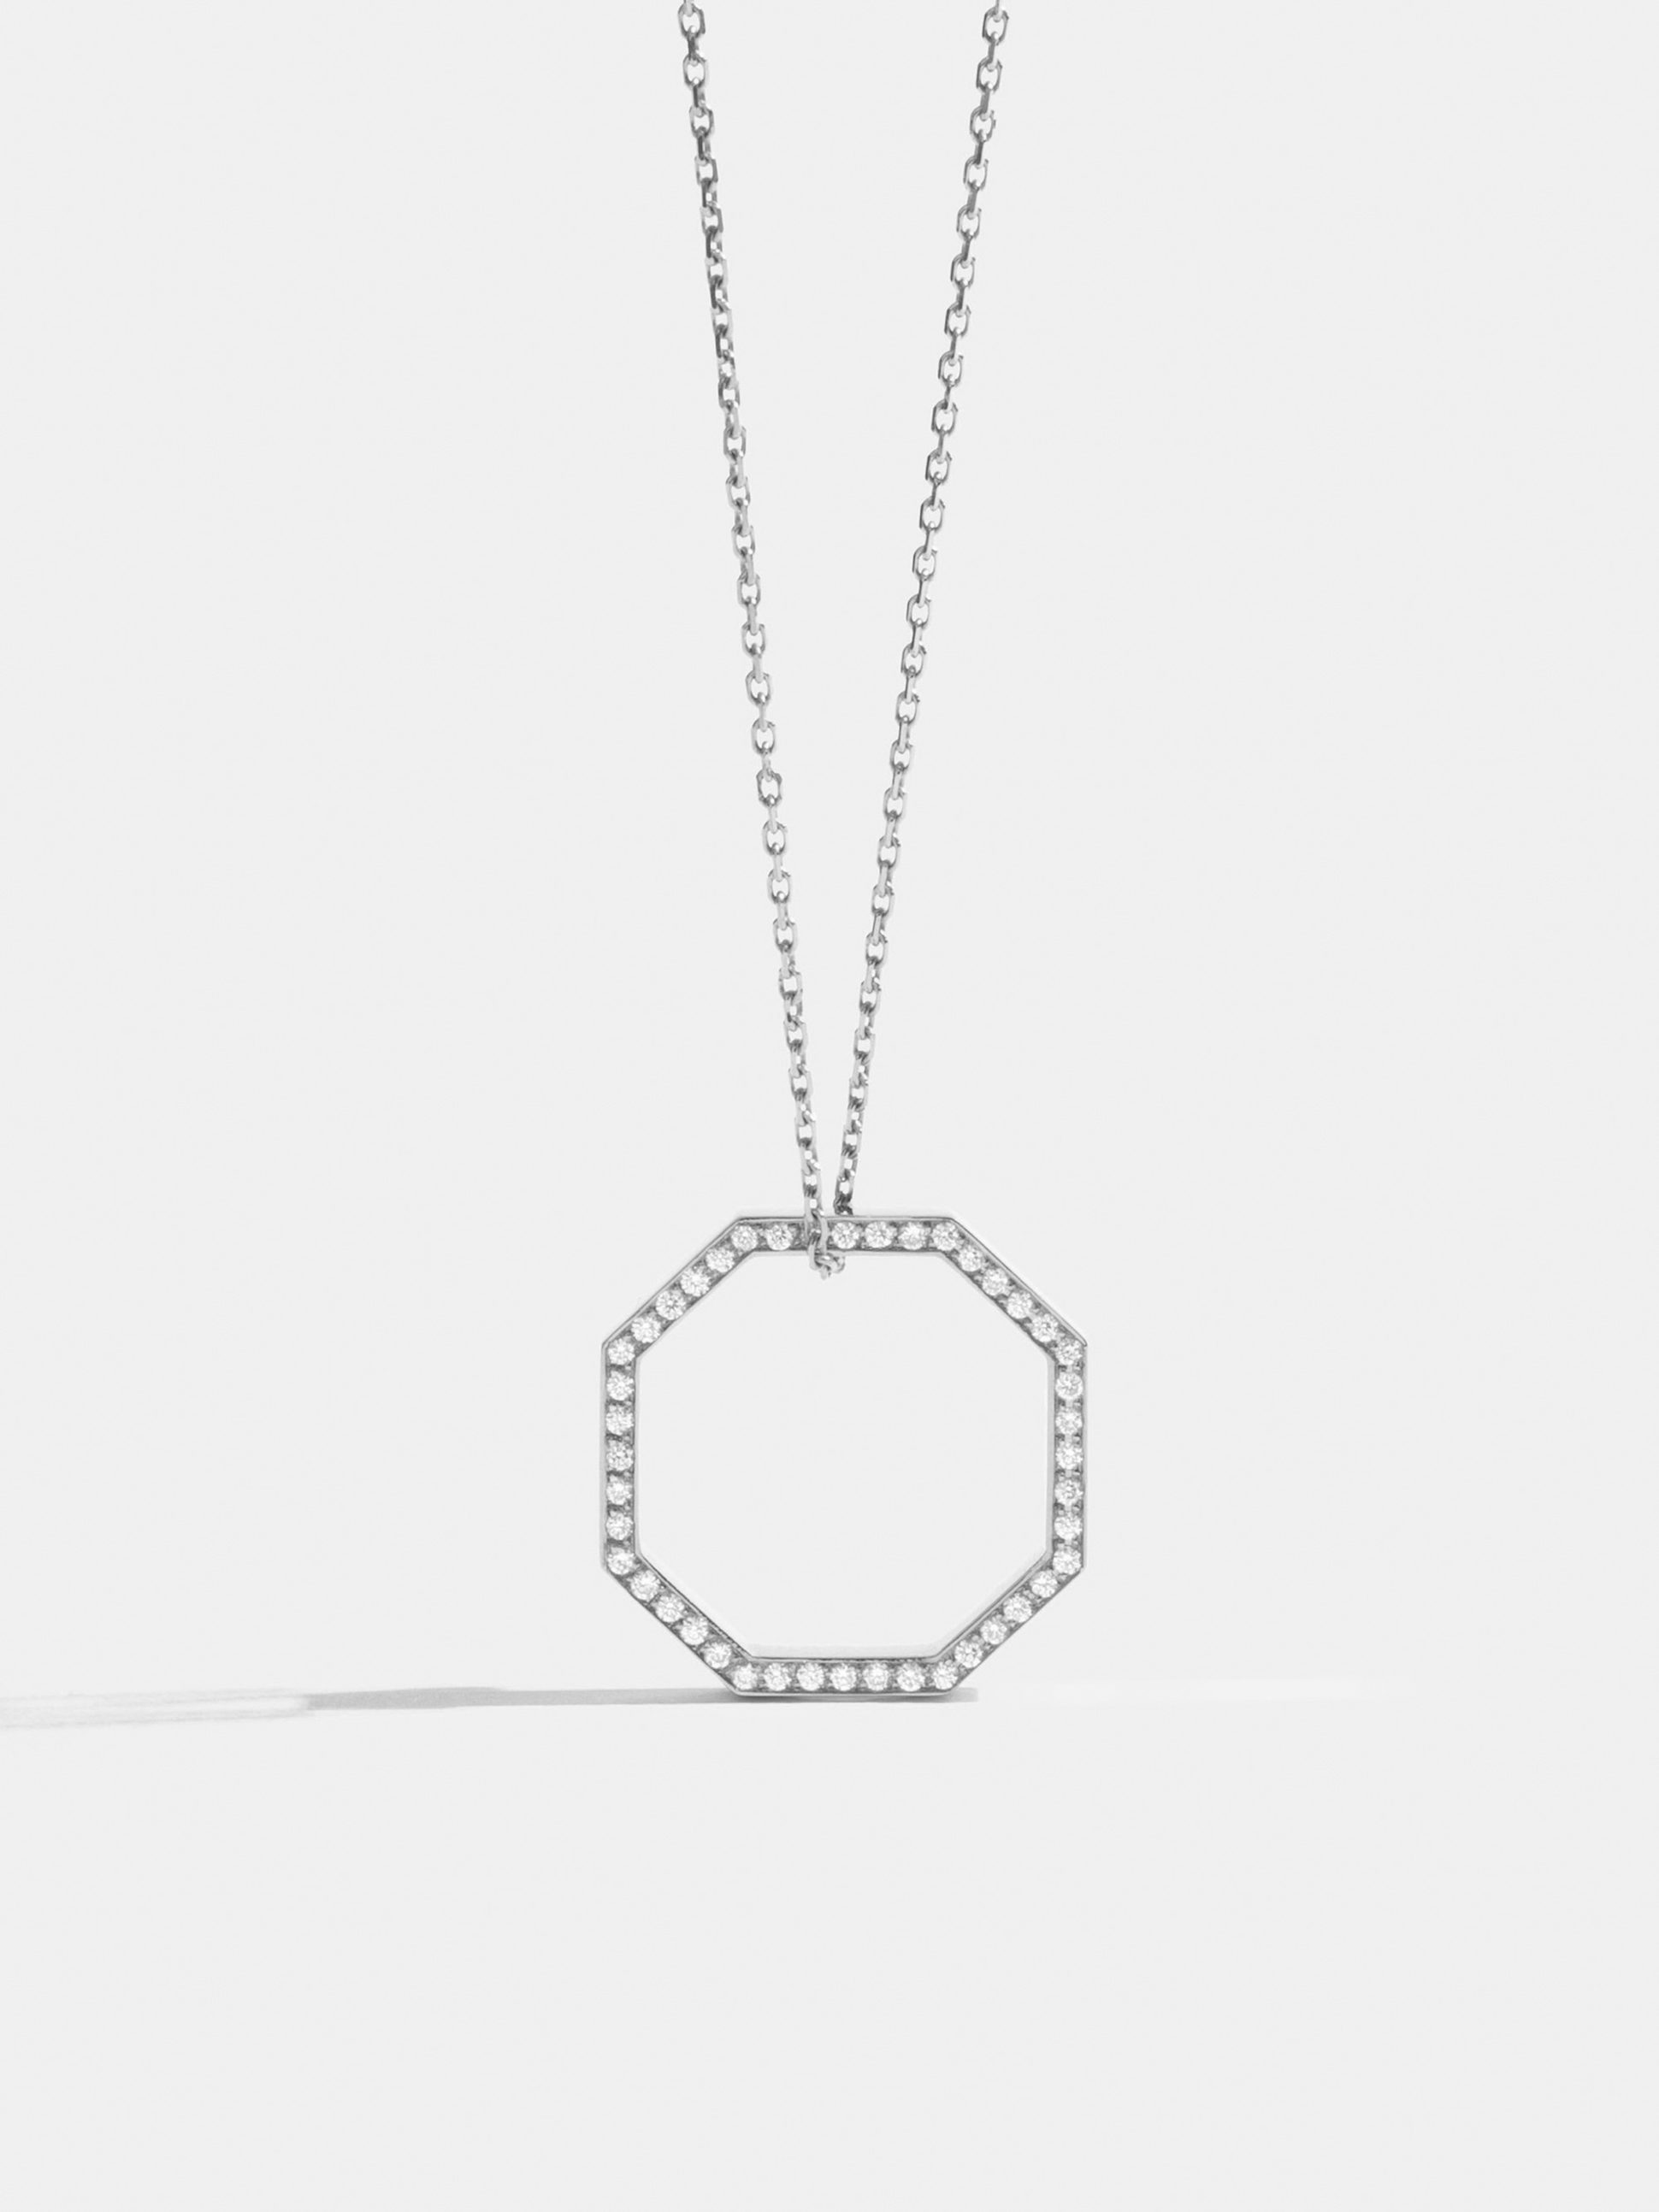 Octogone necklace with a 18mm pendant in 18k Fairmined ethical white gold, paved with lab-grown diamonds, on a 88cm chain.